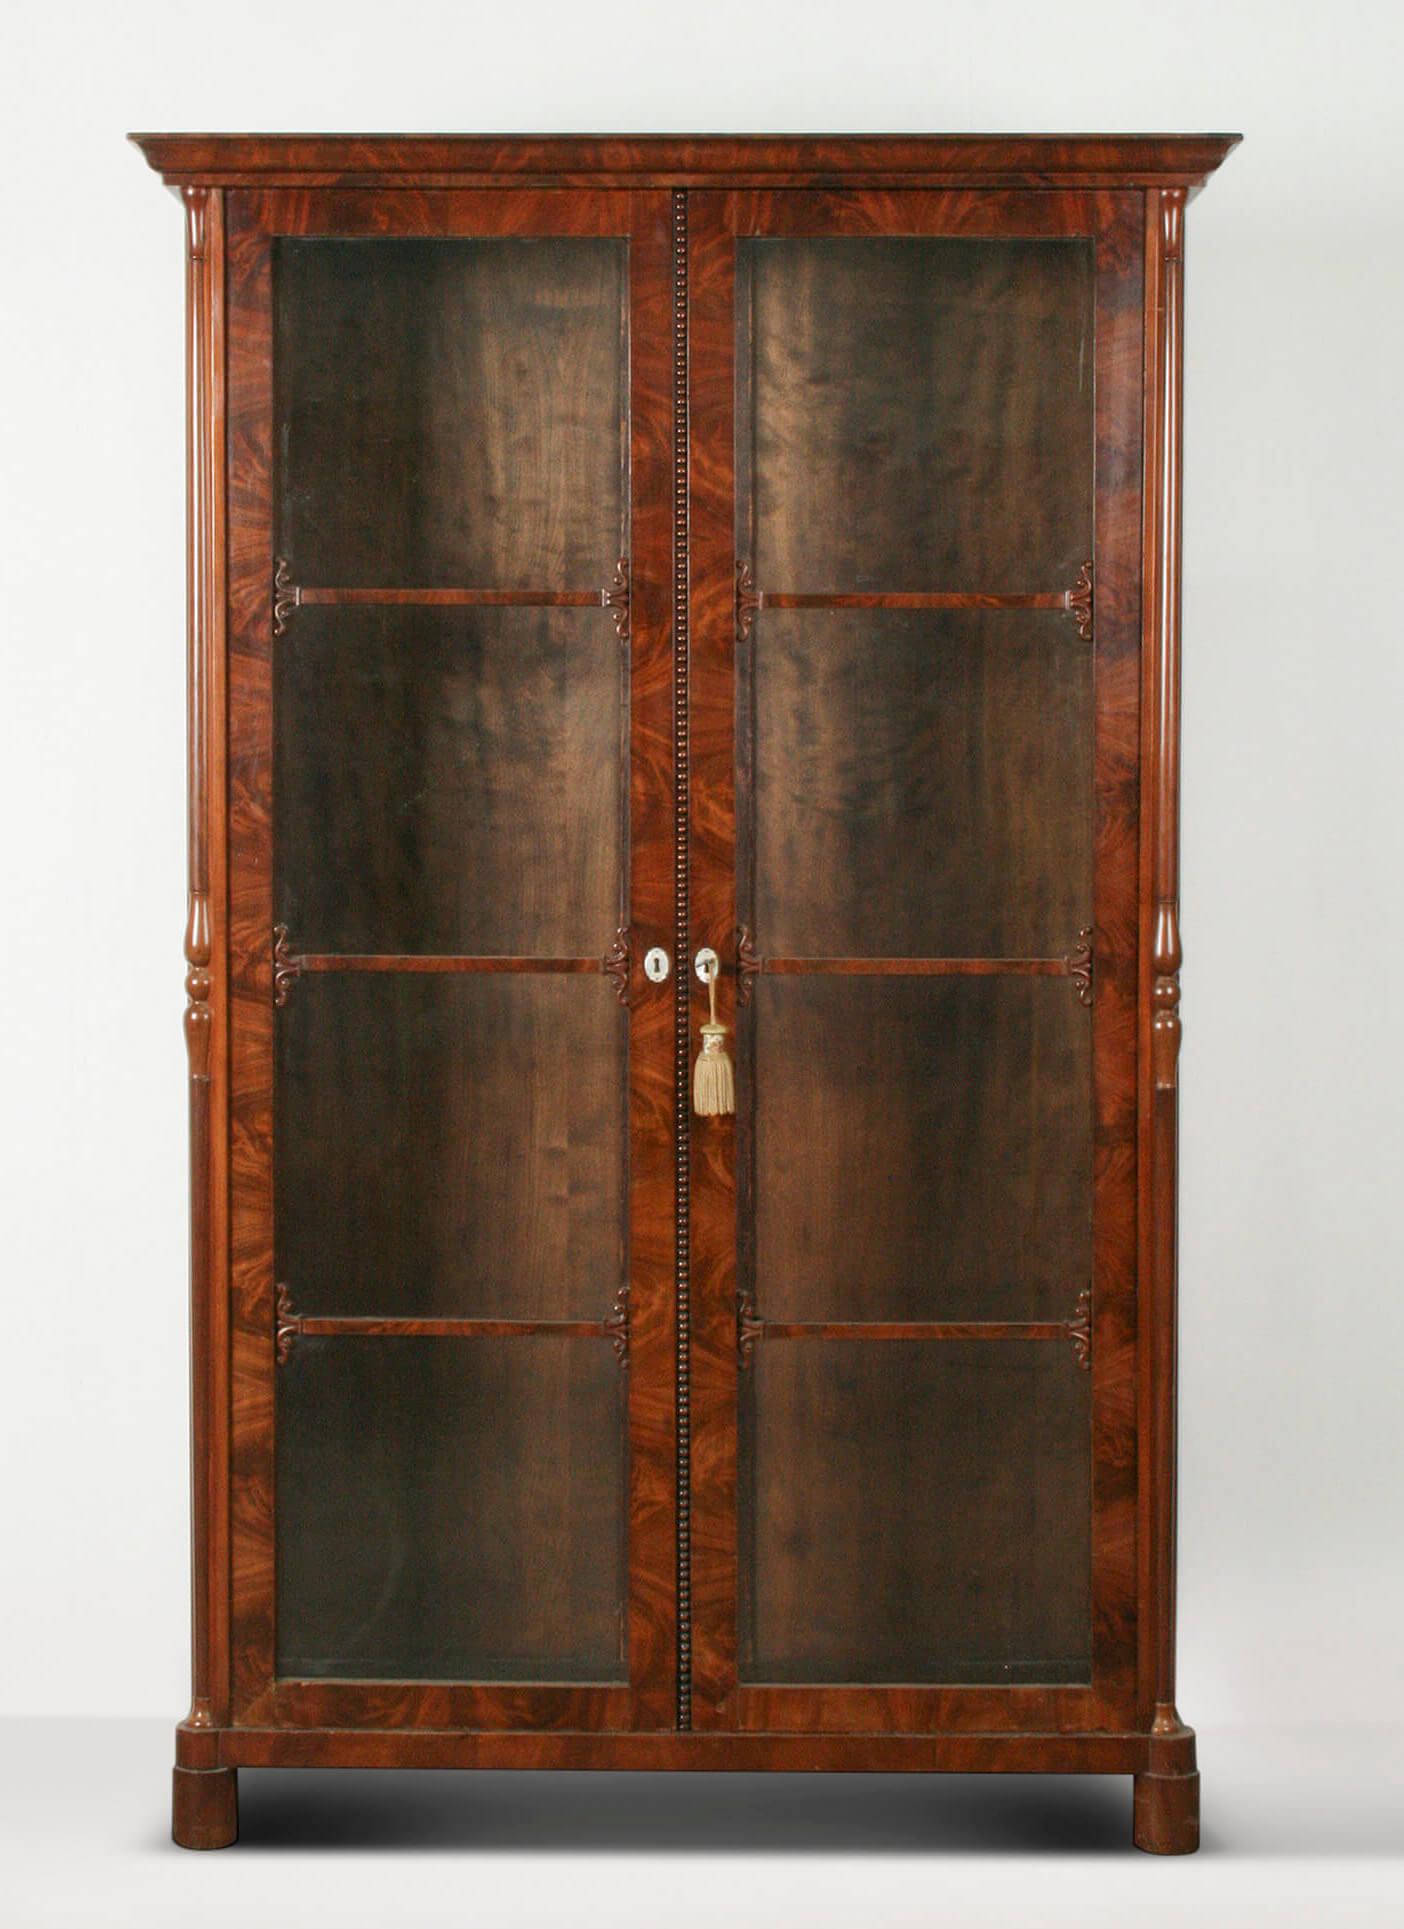 Dutch antique bookcase or display cabinet.
Mahogany veneered wood. Original antique glass, which gives a nice effect if you watch the cabinet from beside.
With three shelves, made from pine.
This bookcase has a depth of only 34 centimetres, that